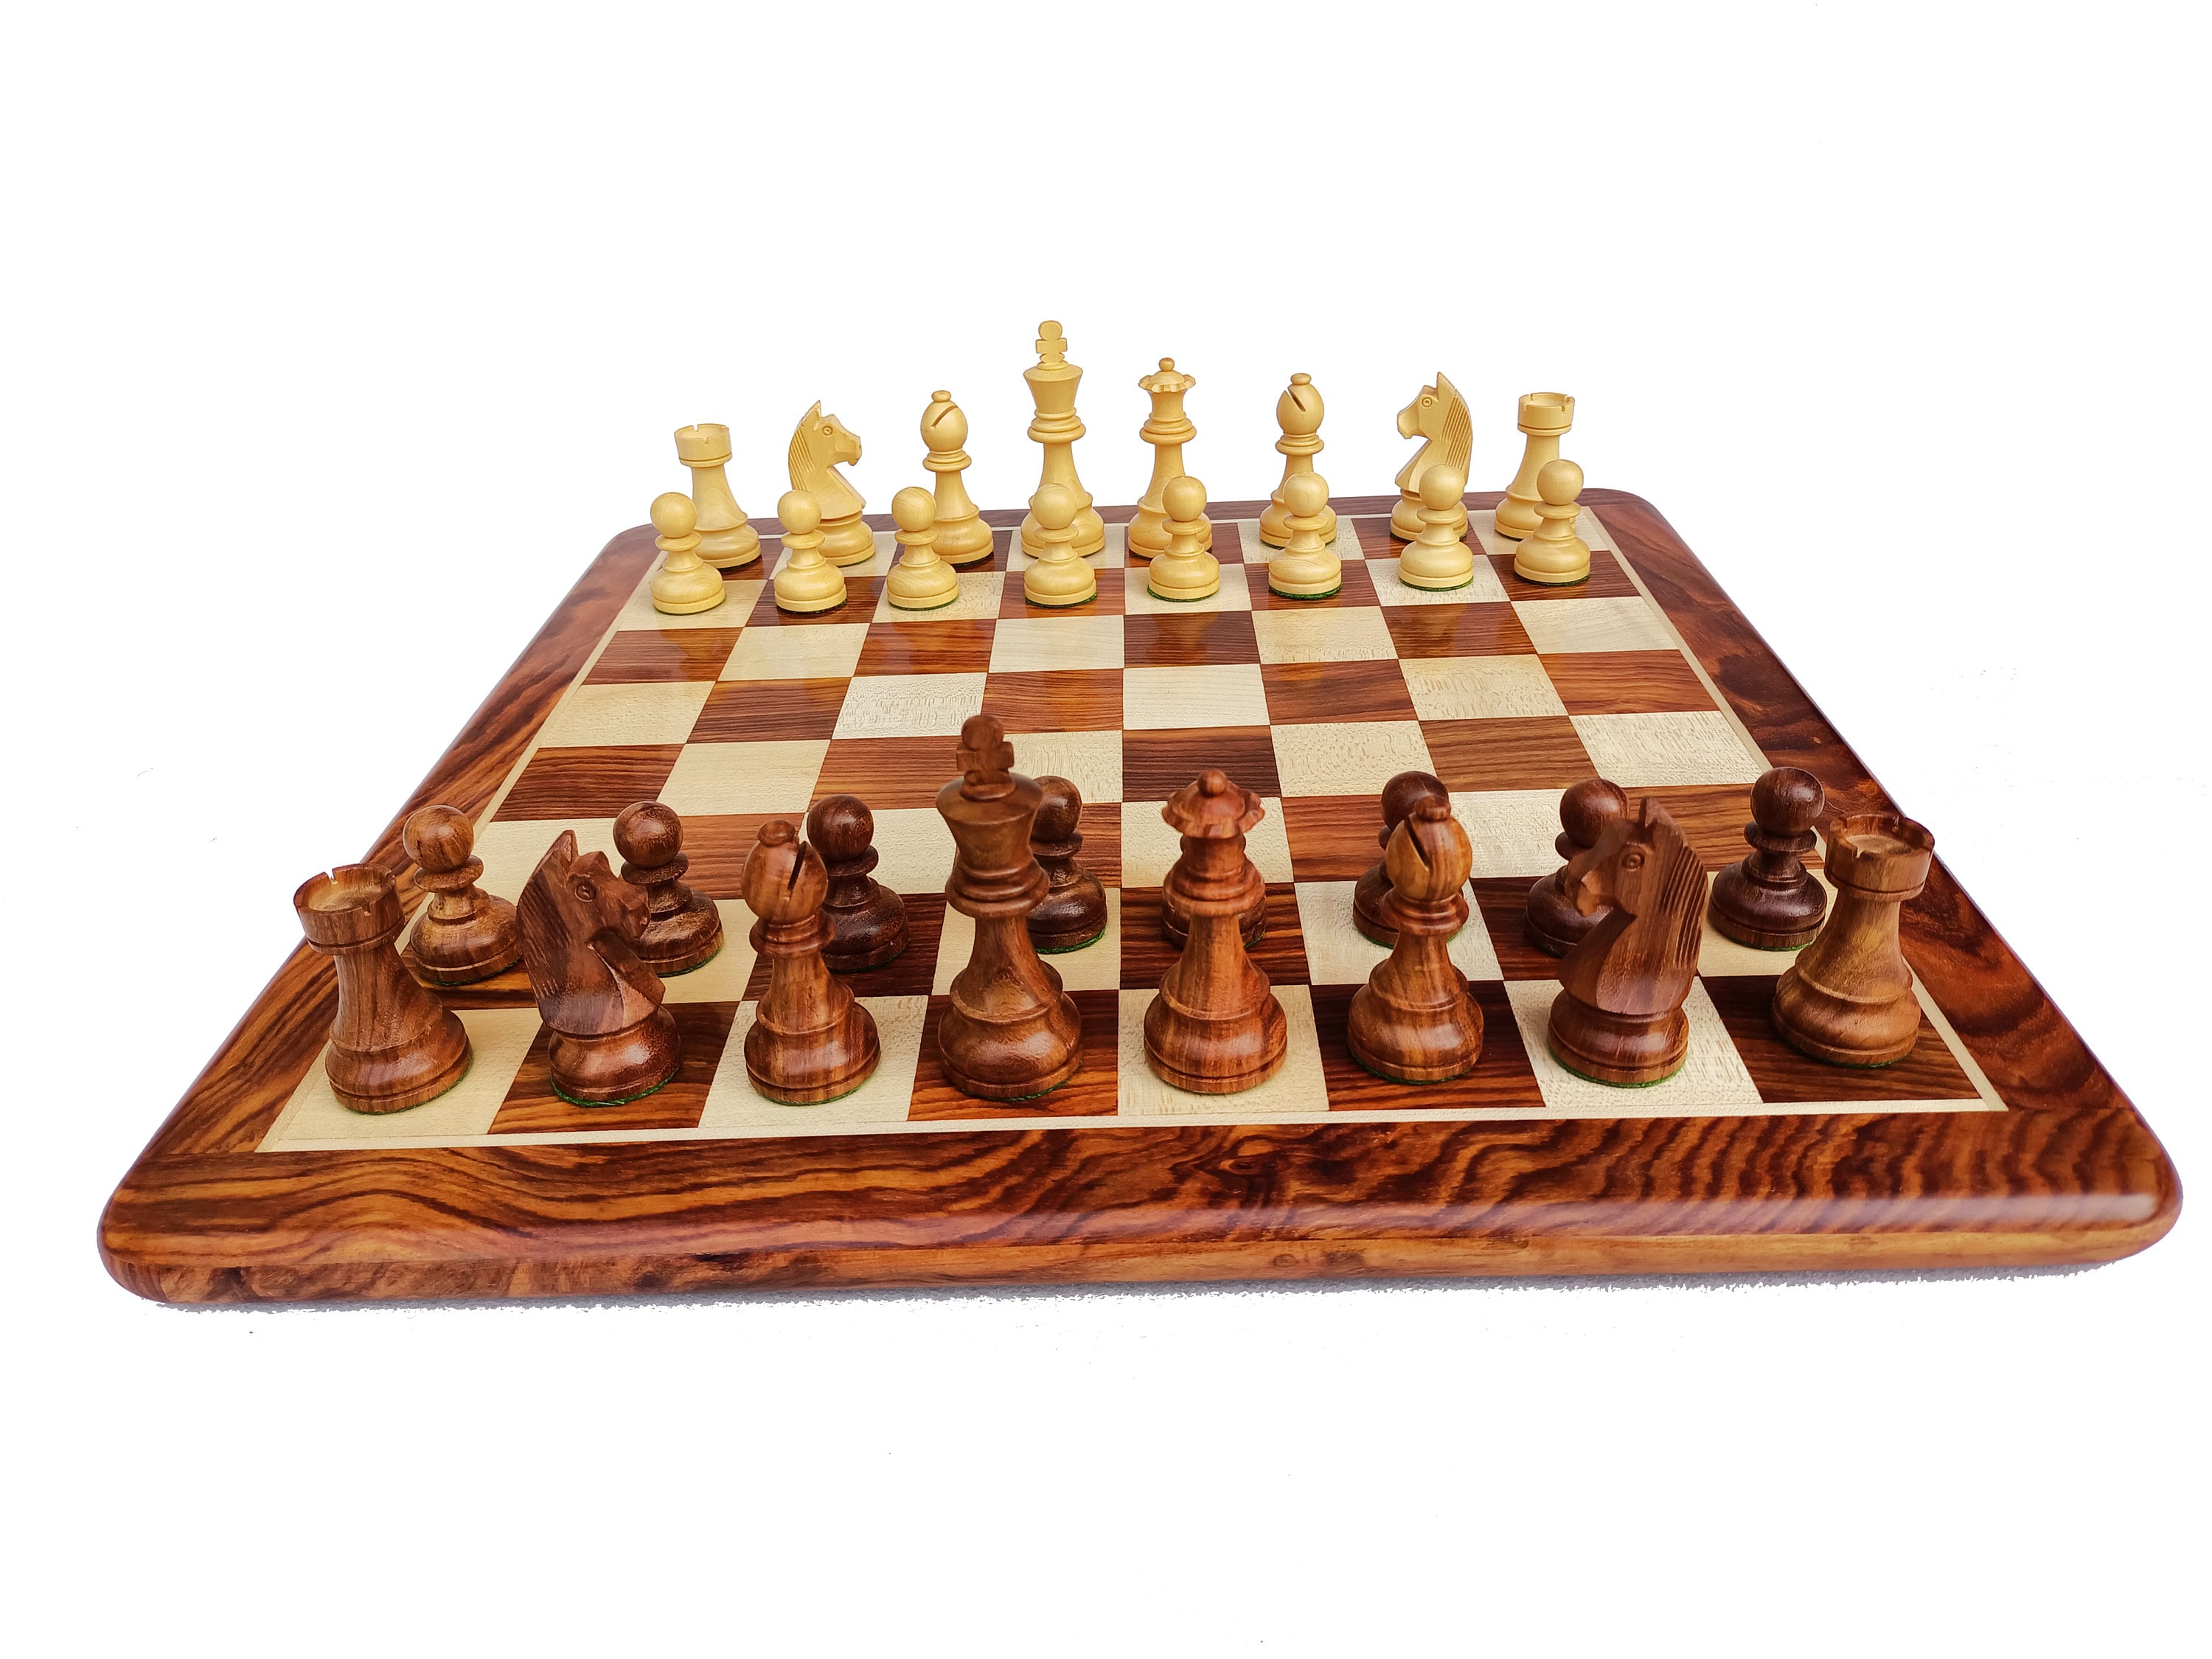 Professional Tournament Chess Board Set 17" x 17" with Chessmen-32 Pieces 